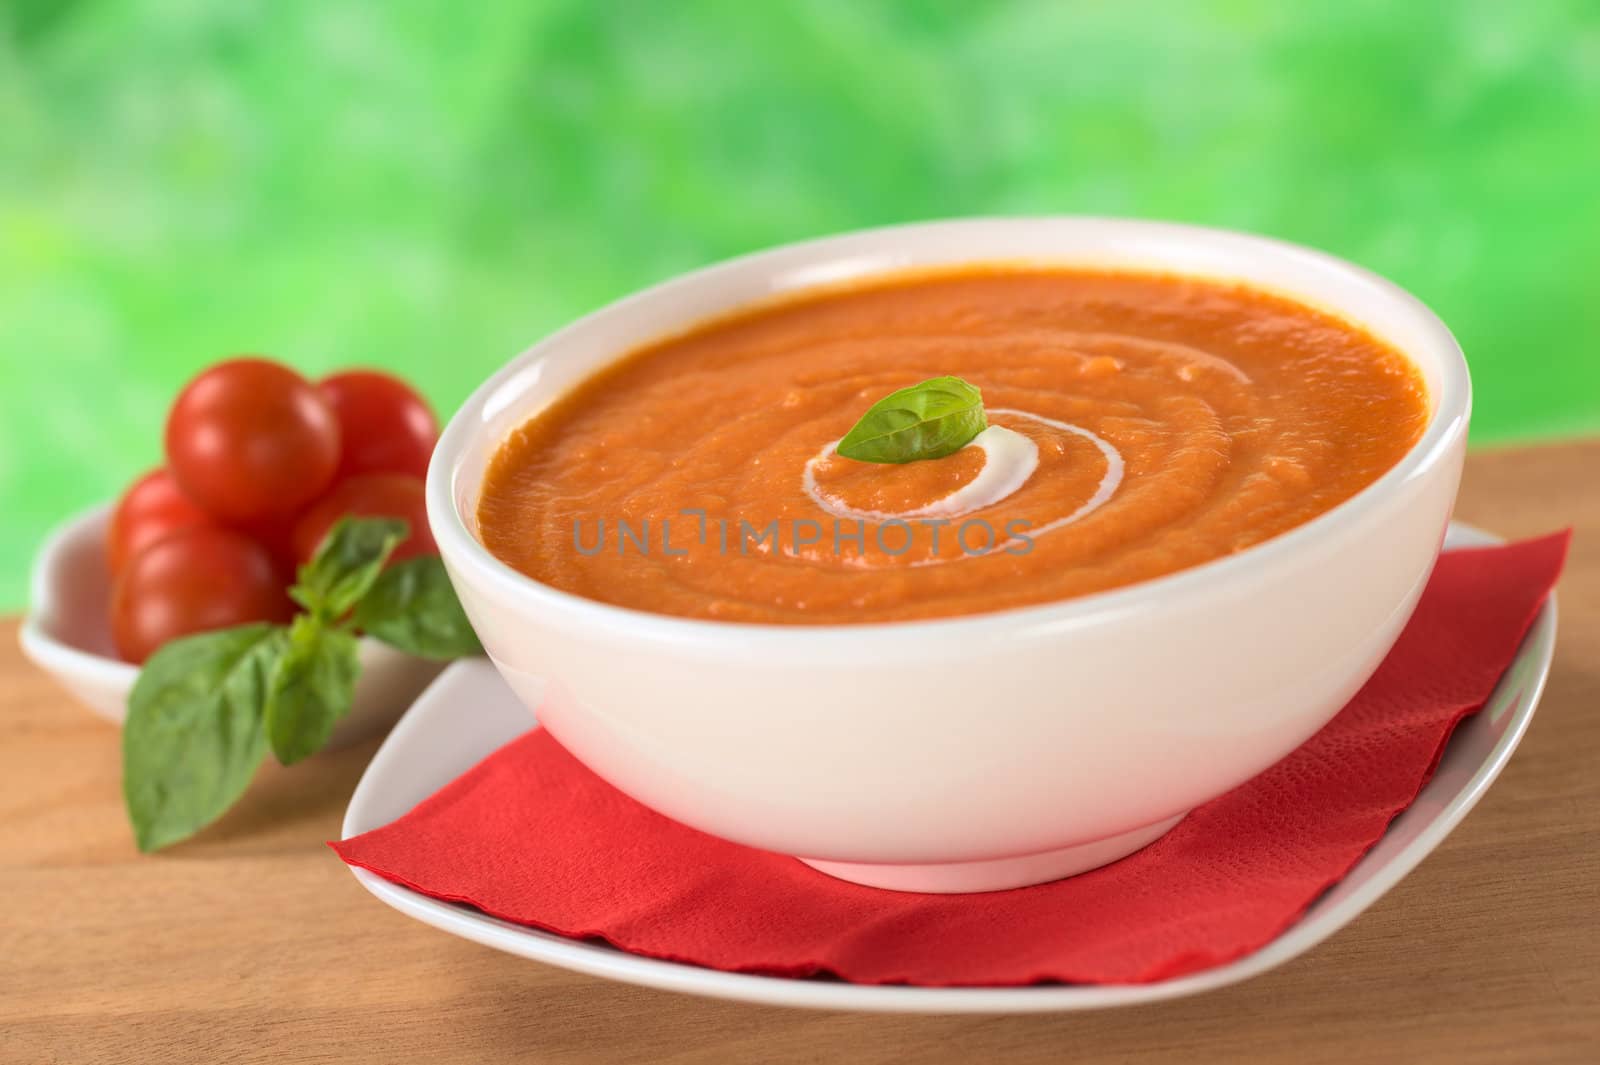 Cream of tomato with a small spiral of cream on top and a basil leaf with tomatoes and basil leaves in the back (Selective Focus, Focus on the basil leaf in the bowl)